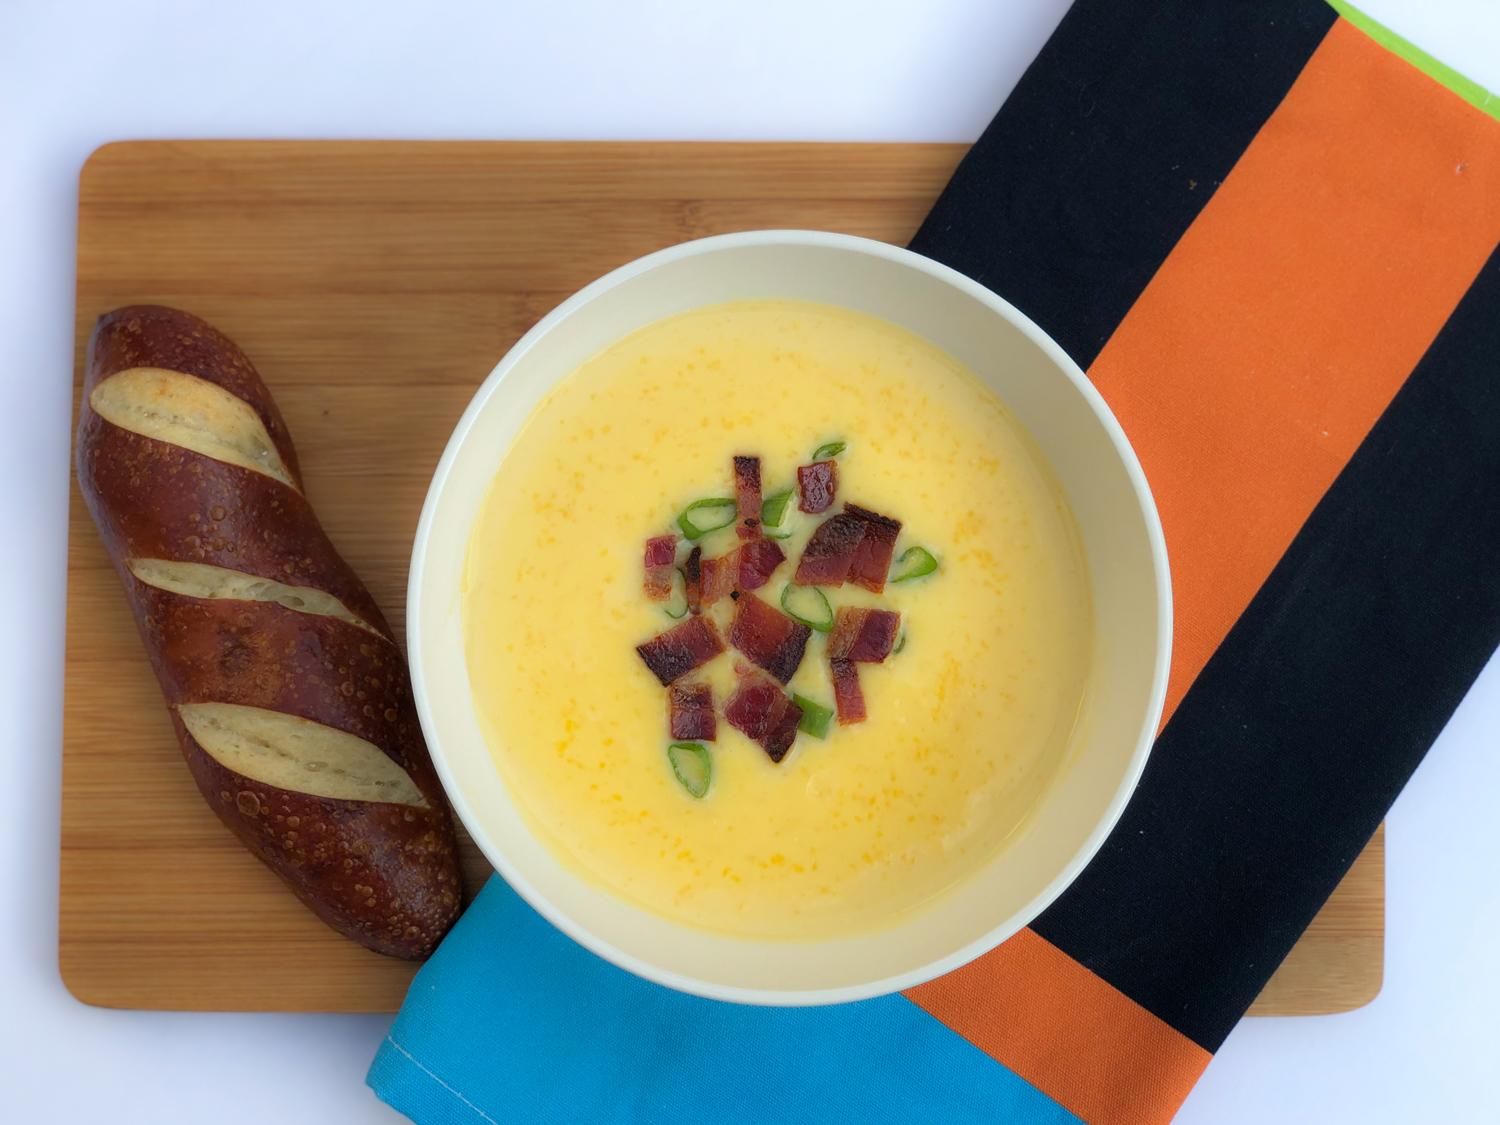 White bowl of cheese soup on a brown board with brown bread and orange and blue kitchen towel